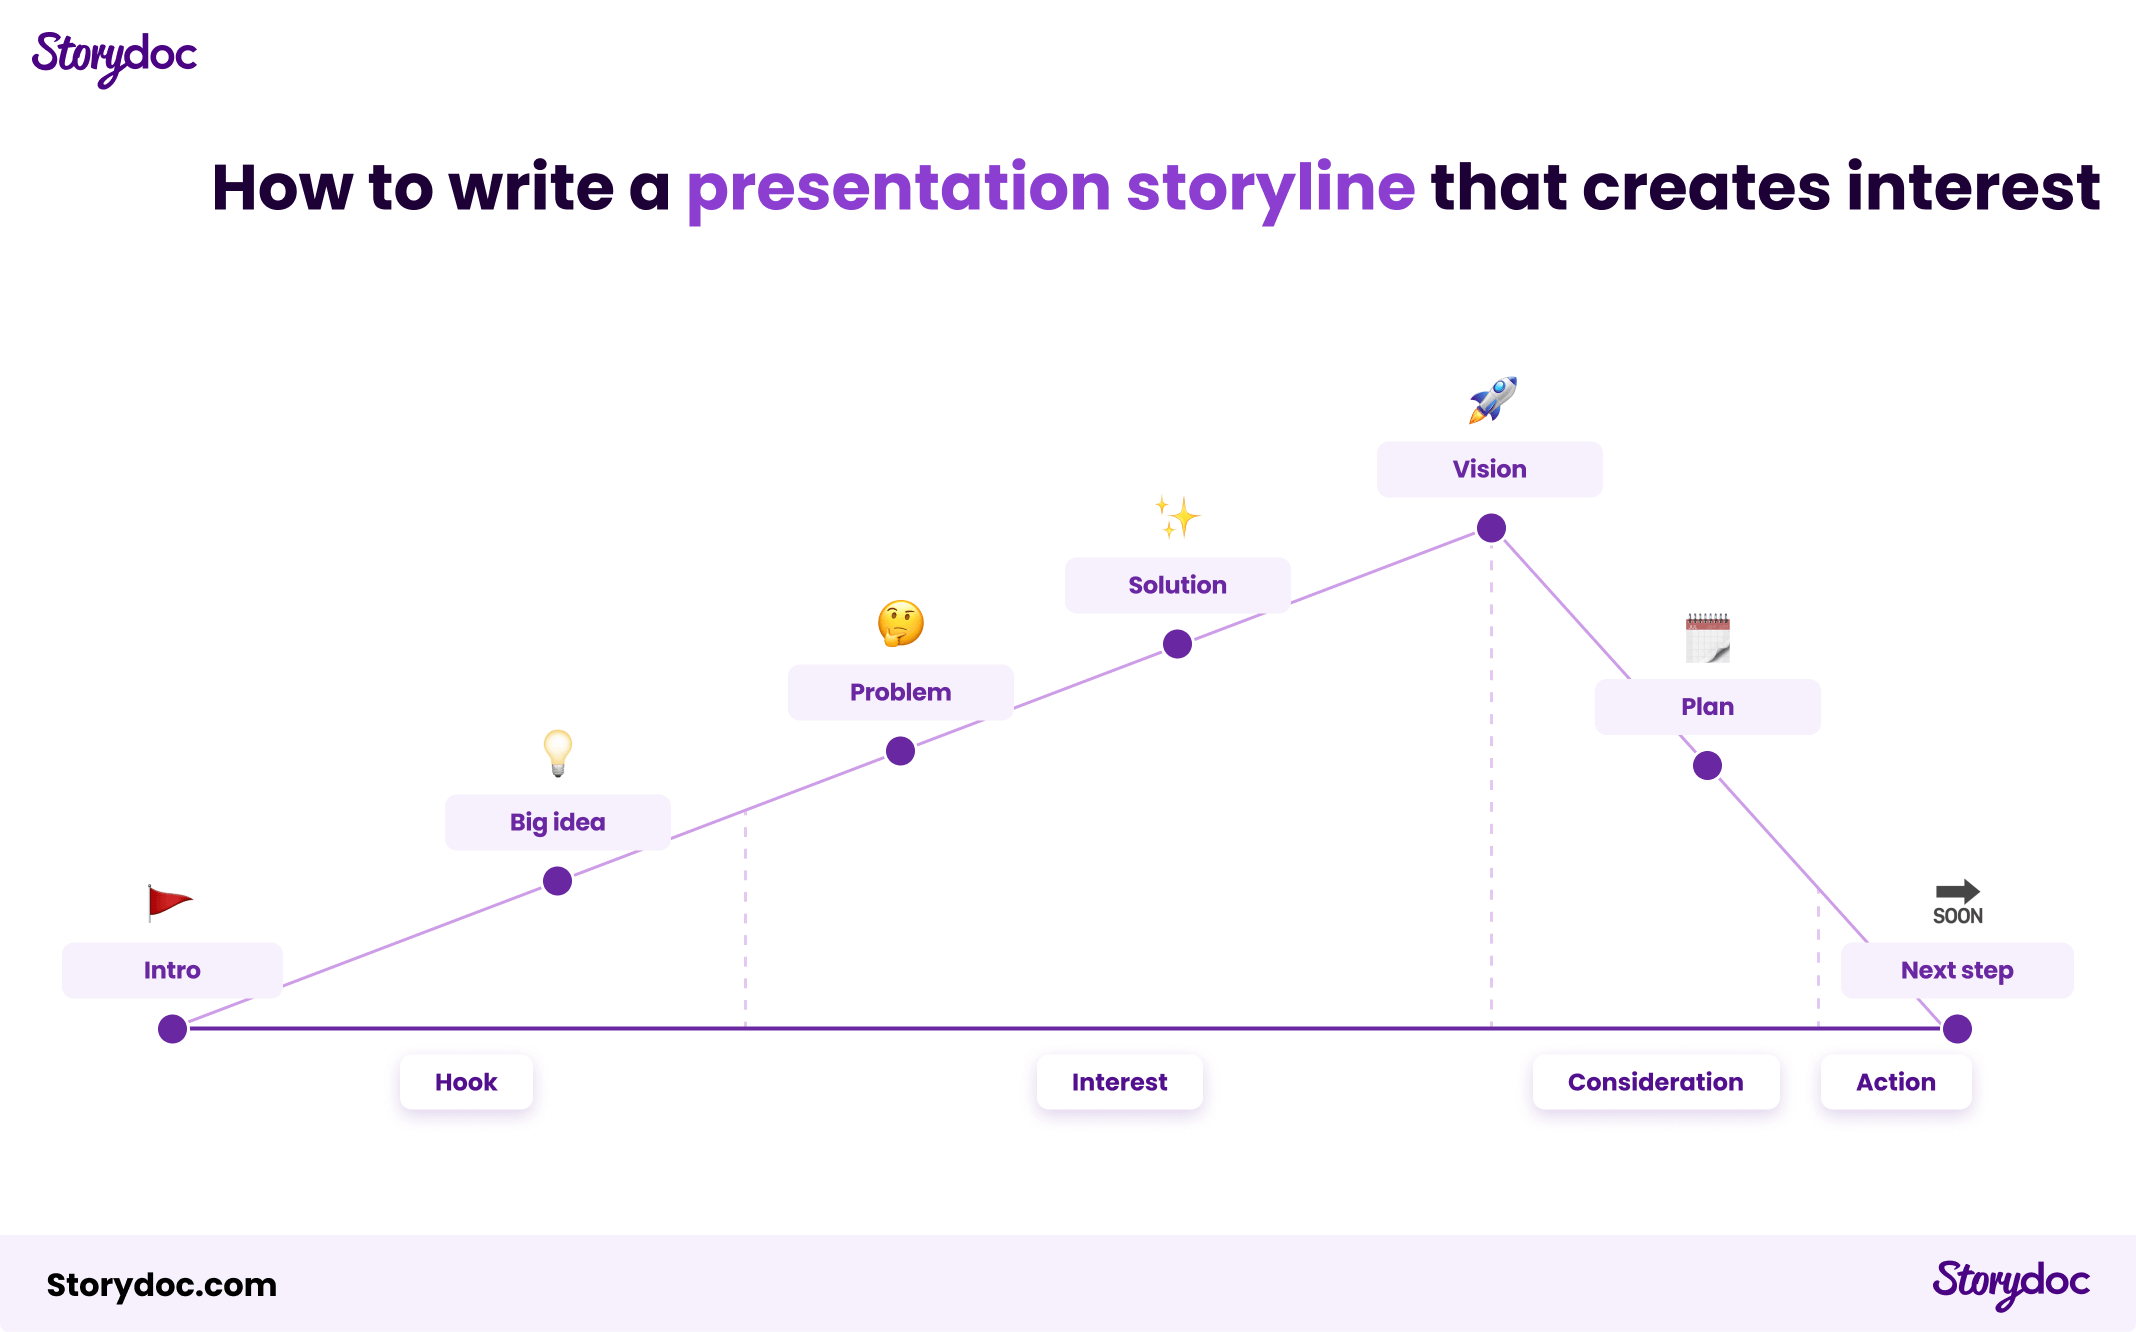 How to write a presentation storyline that creates interest